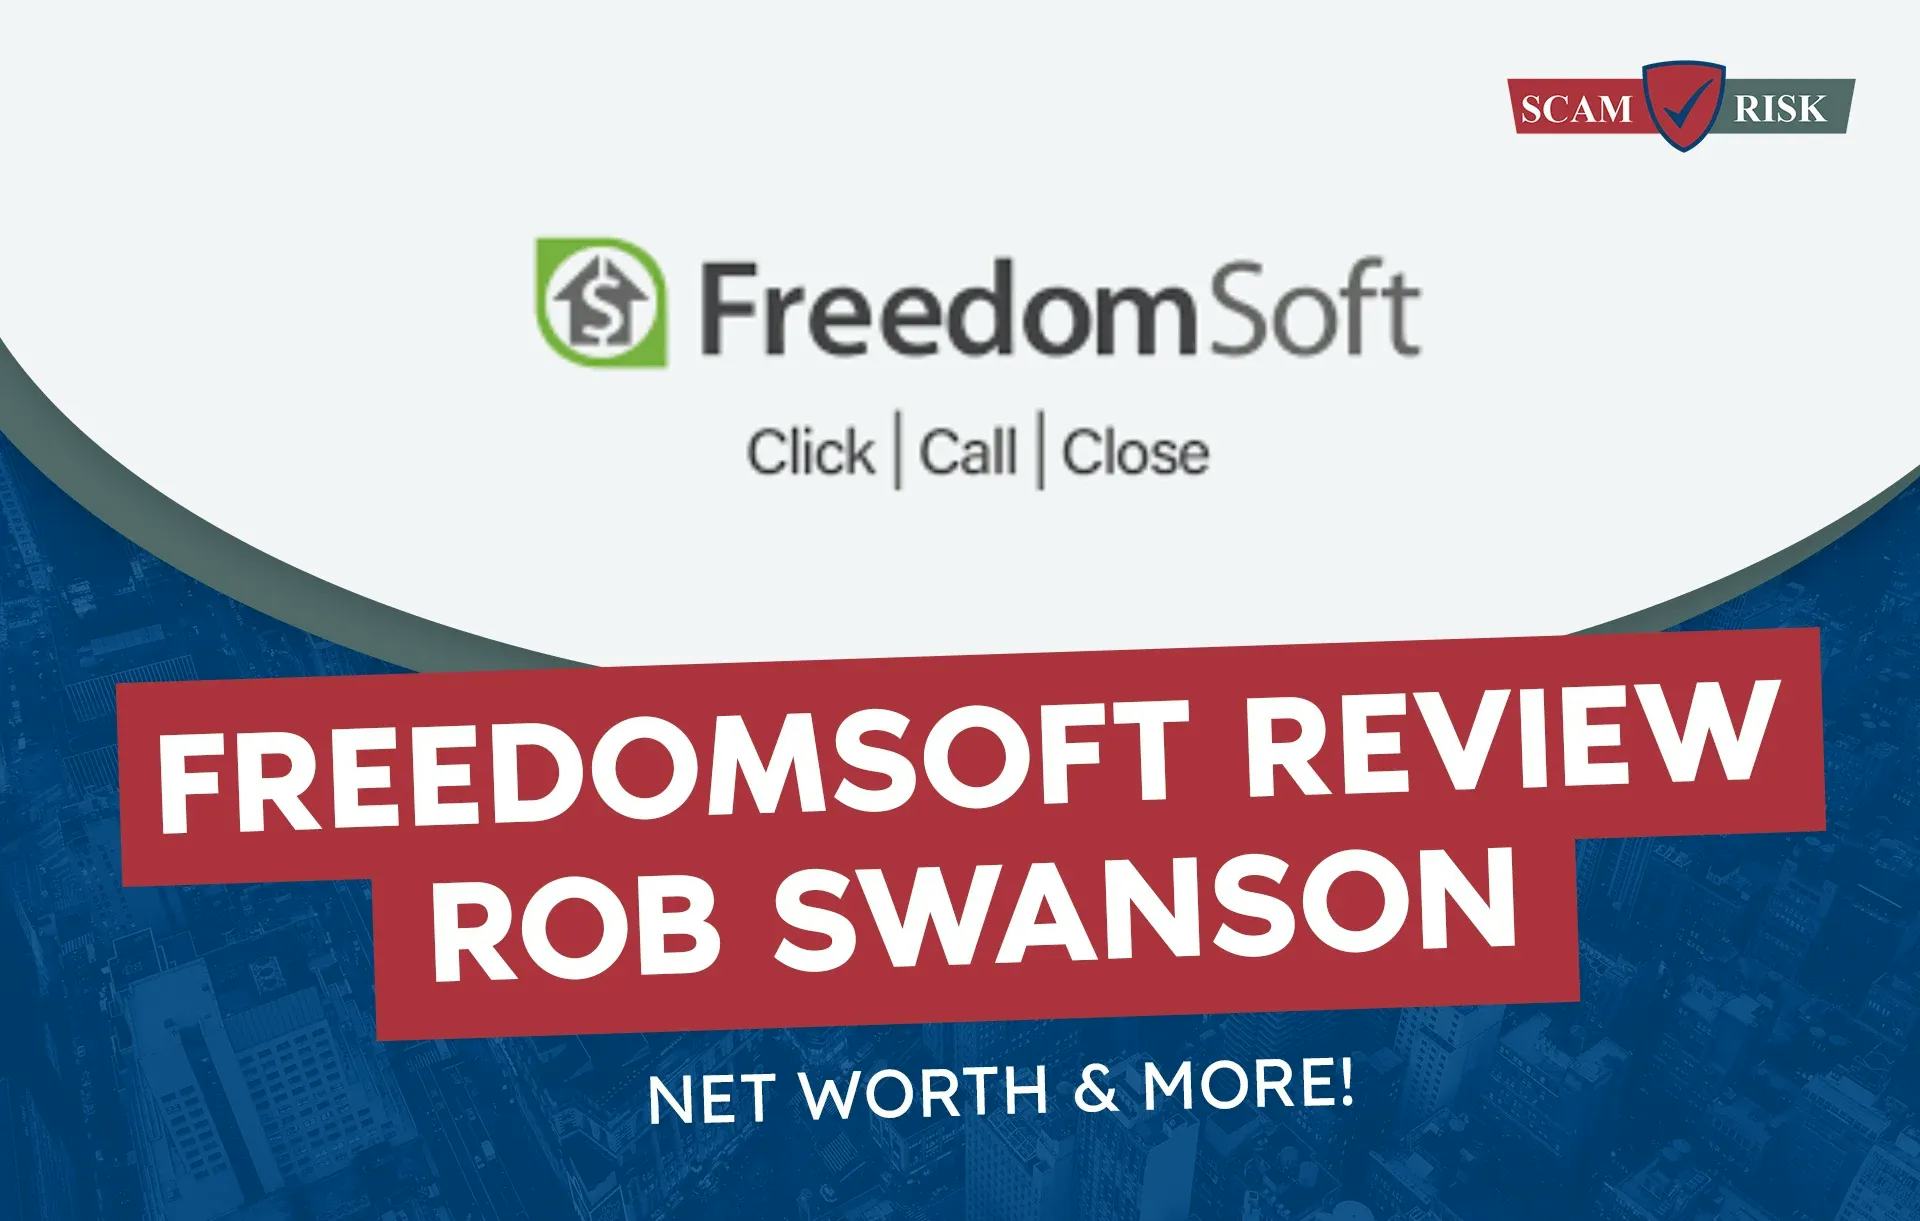 FreedomSoft Review Rob Swanson ([year] Update): Net Worth & More!